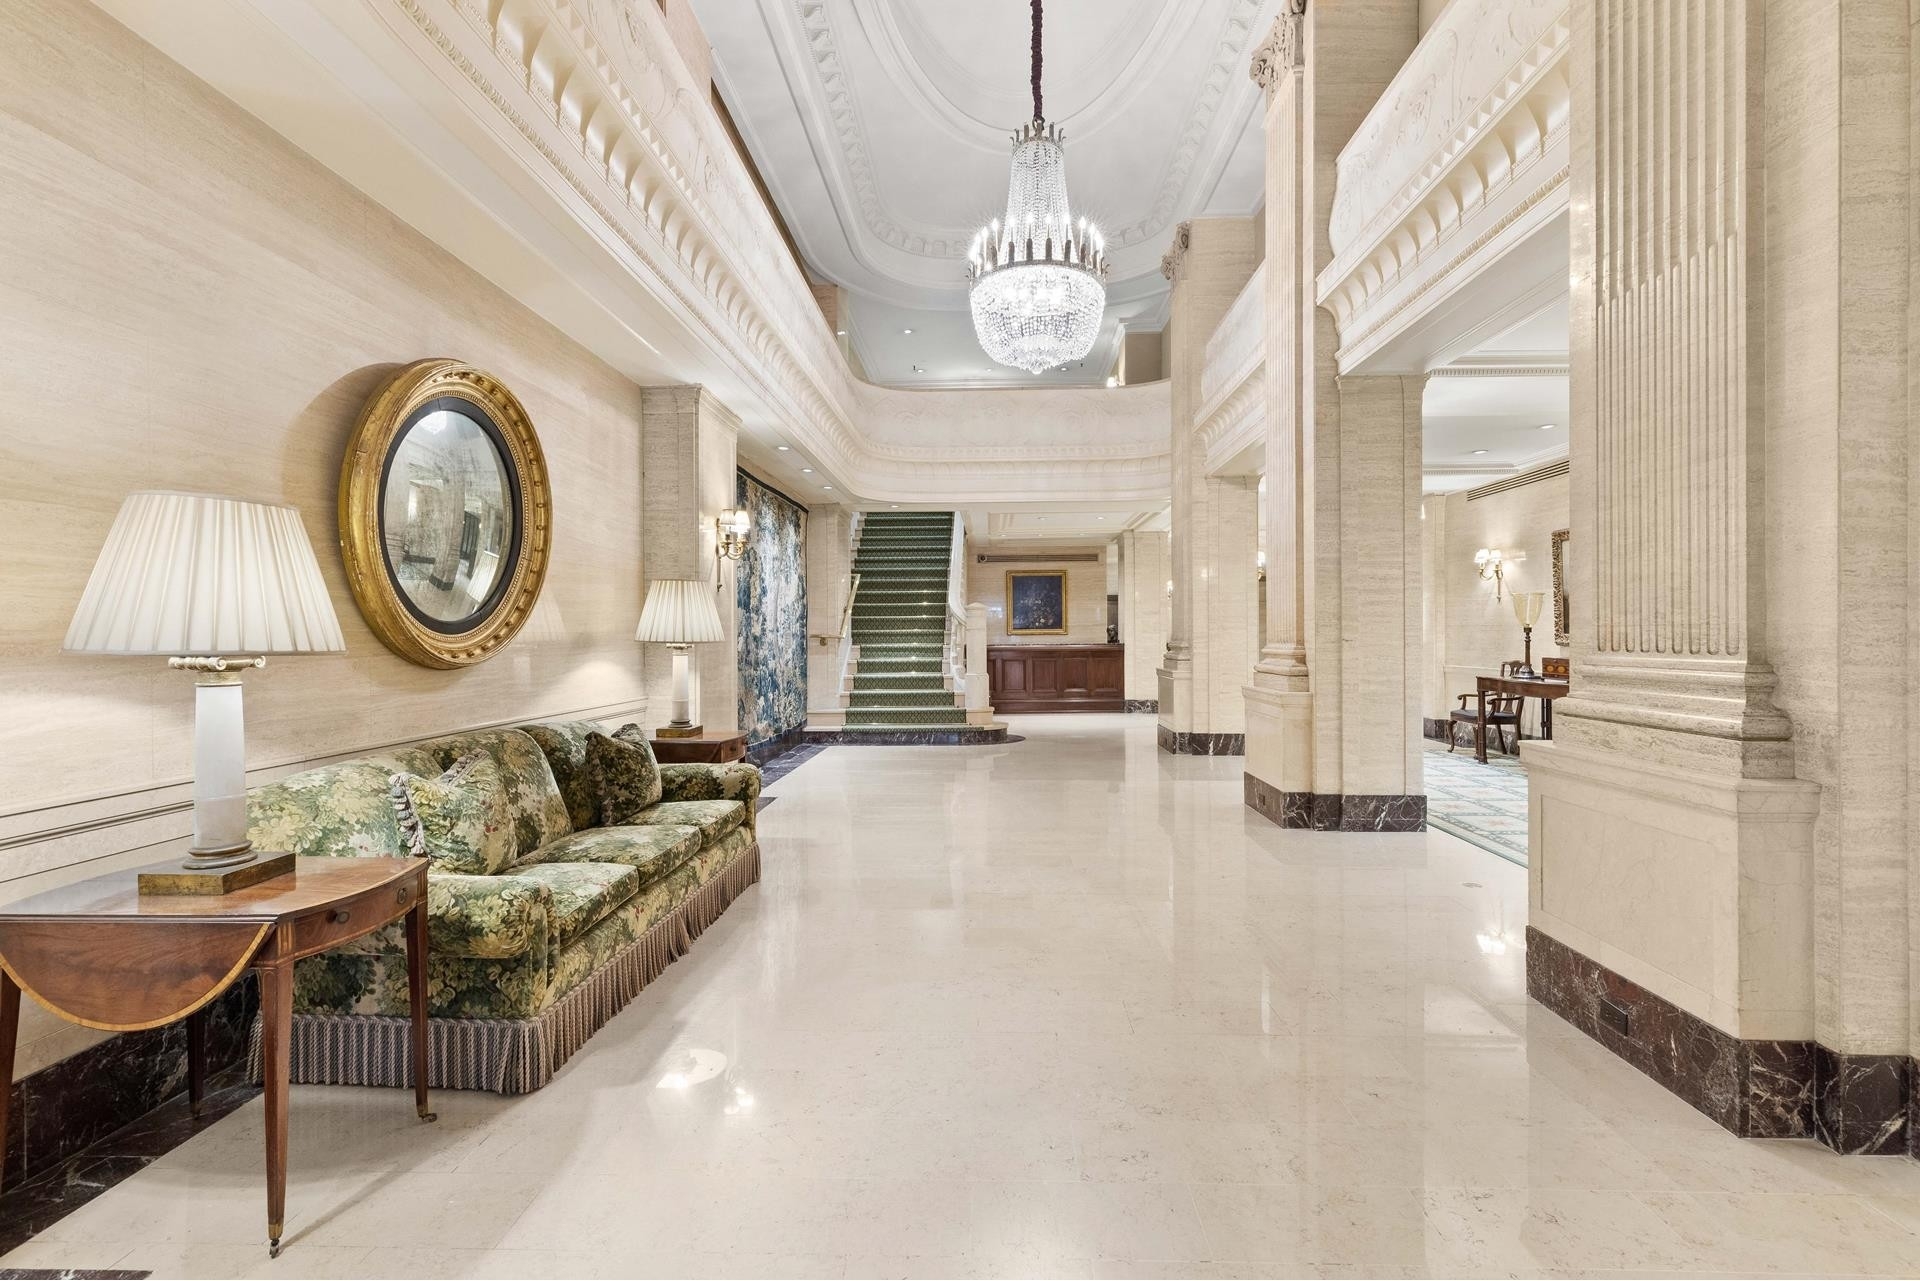 8. Condominiums for Sale at The Westbury, 15 E 69TH ST, 5A Lenox Hill, New York, New York 10021